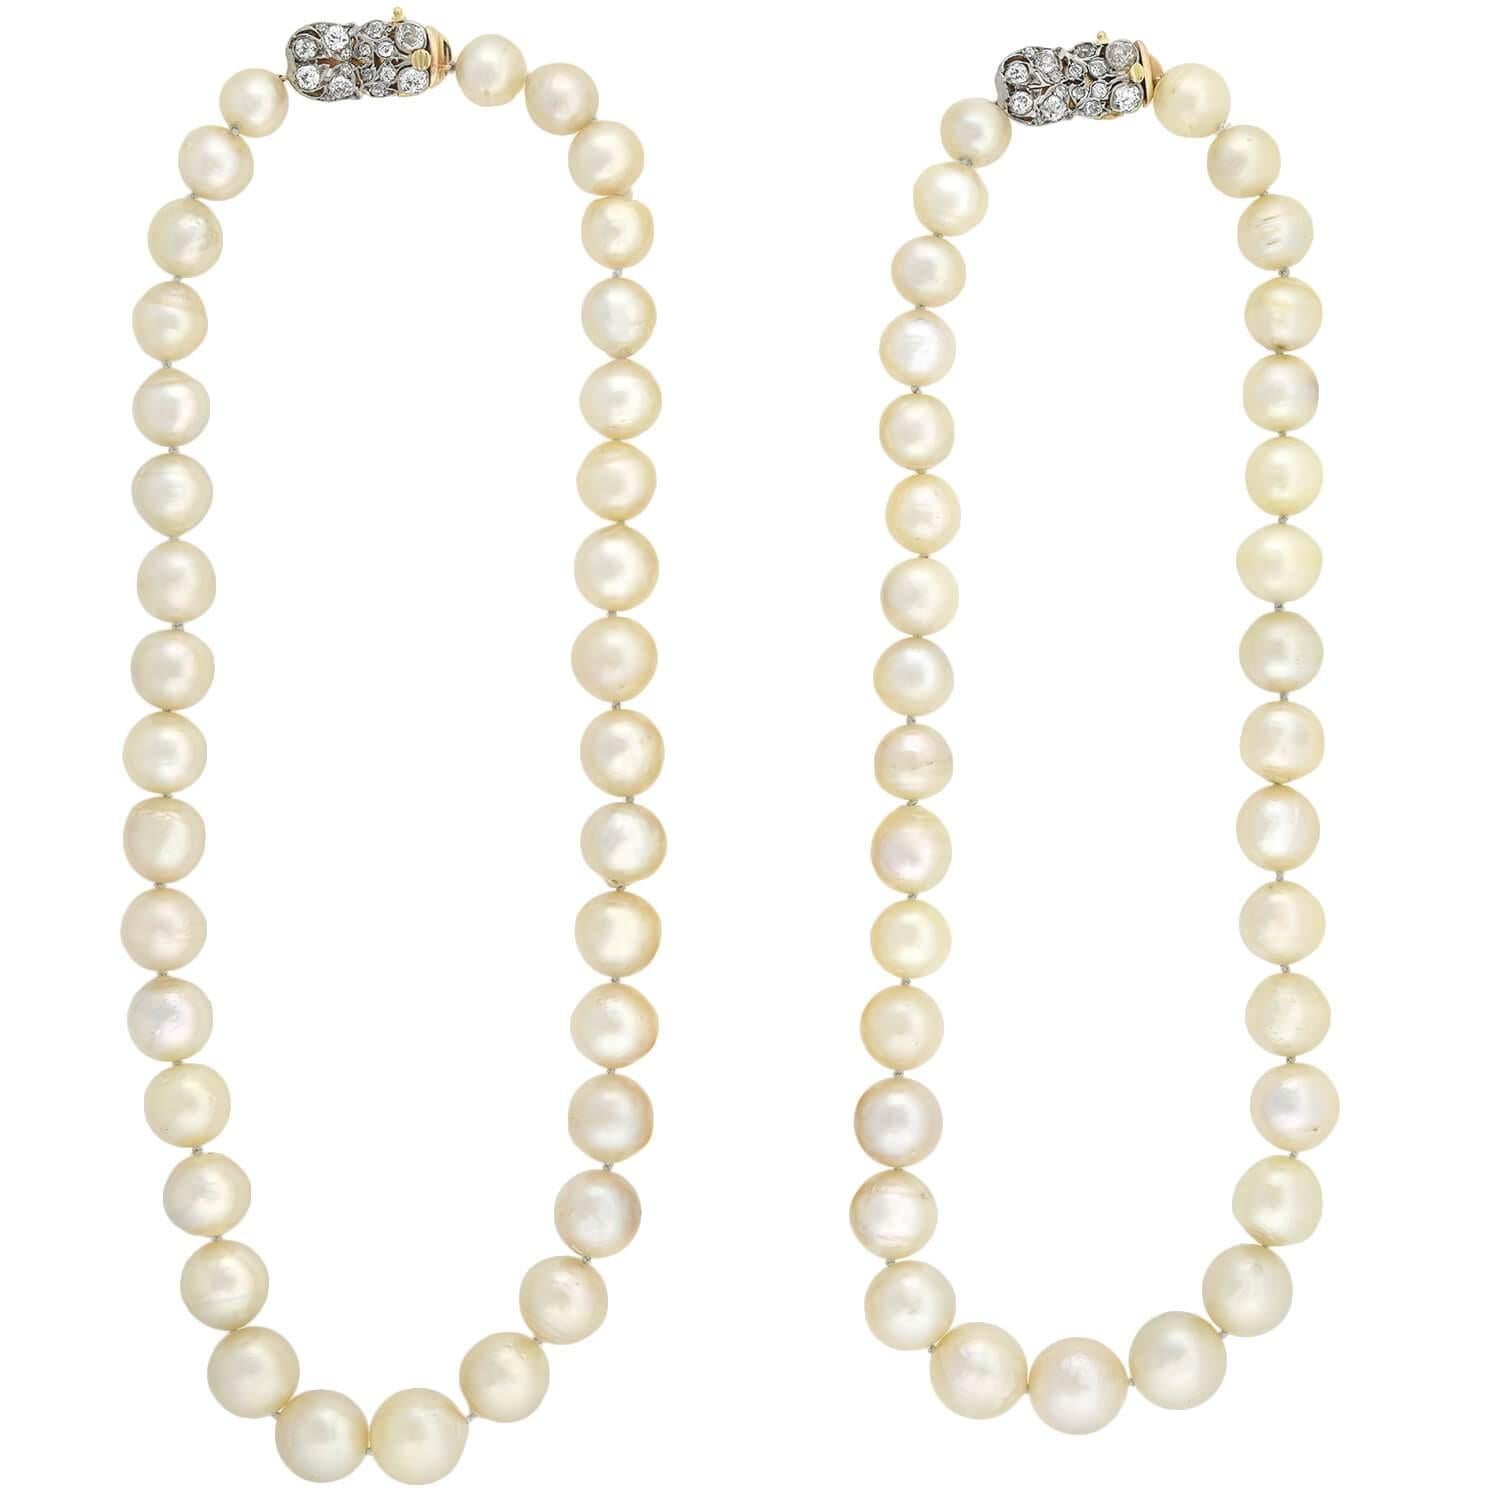 A classically beautiful and very unique South Sea Pearl convertible necklace with gorgeous Edwardian (ca1910s) era diamond clasps! This fabulous piece is comprised of a single strand of substantially sized pearls which can convert to be worn as two